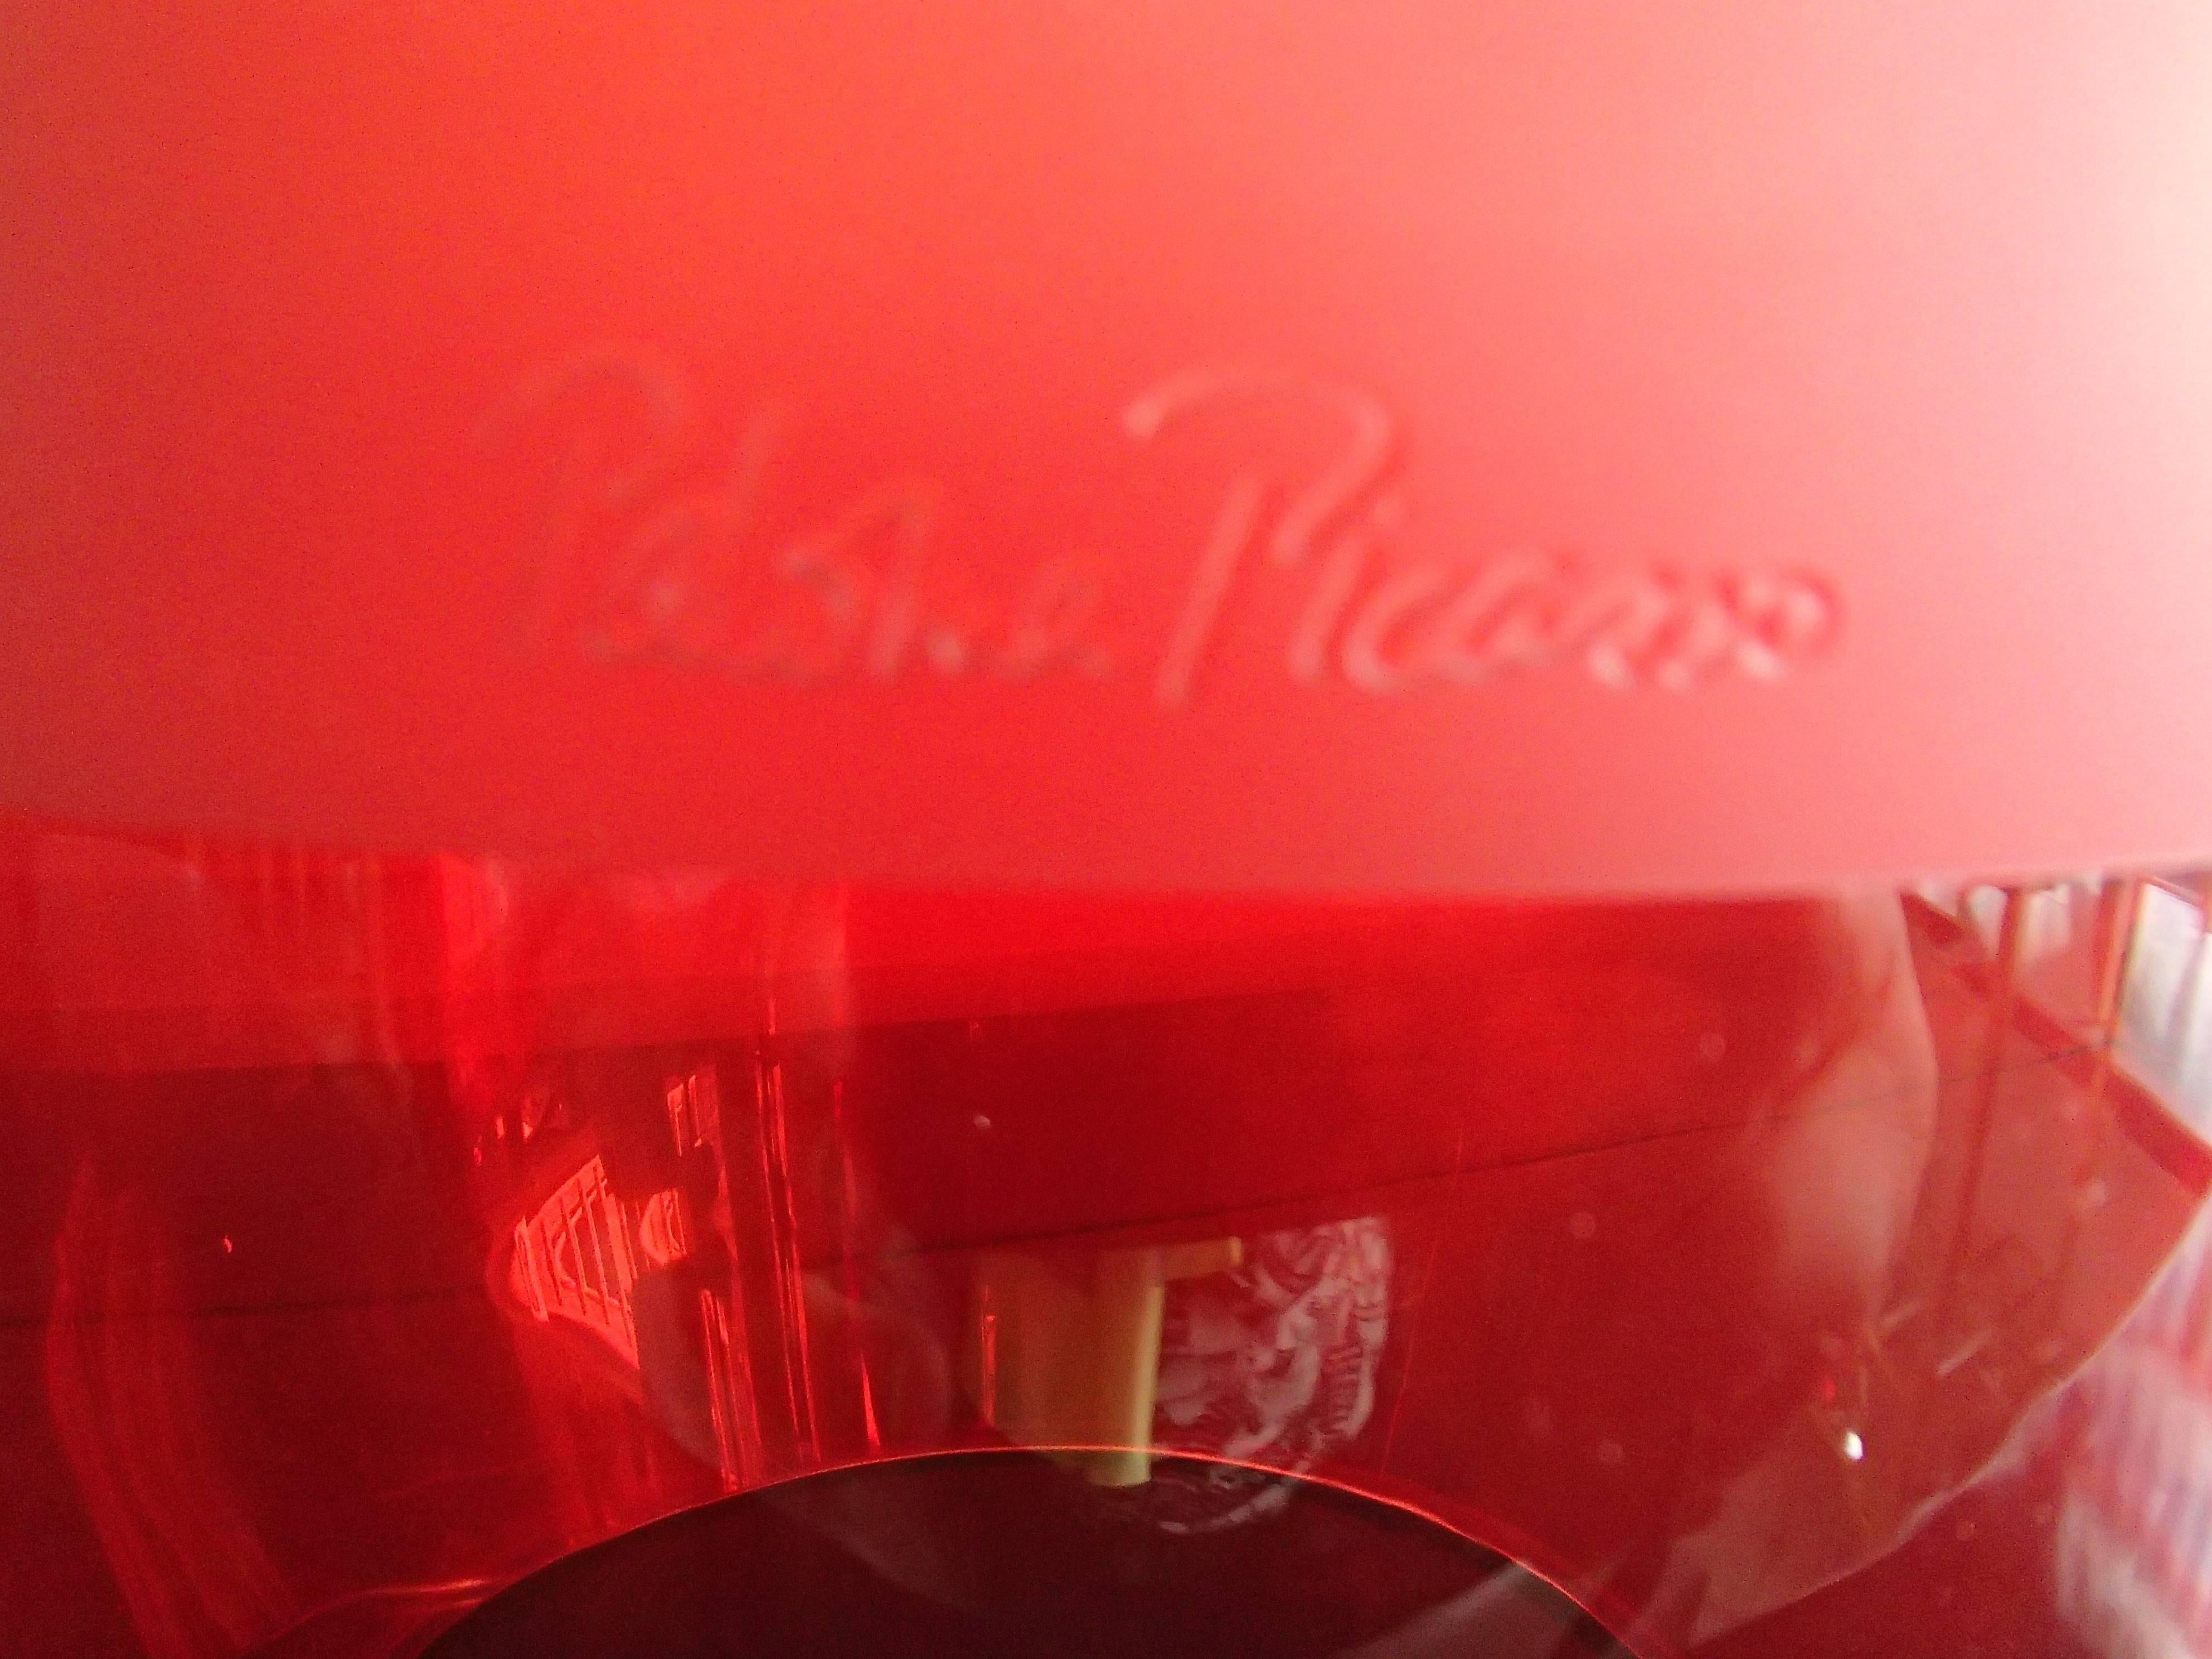 Modern huge red glass signed by Paloma Picasso without base may be used for dry flowers, candles.